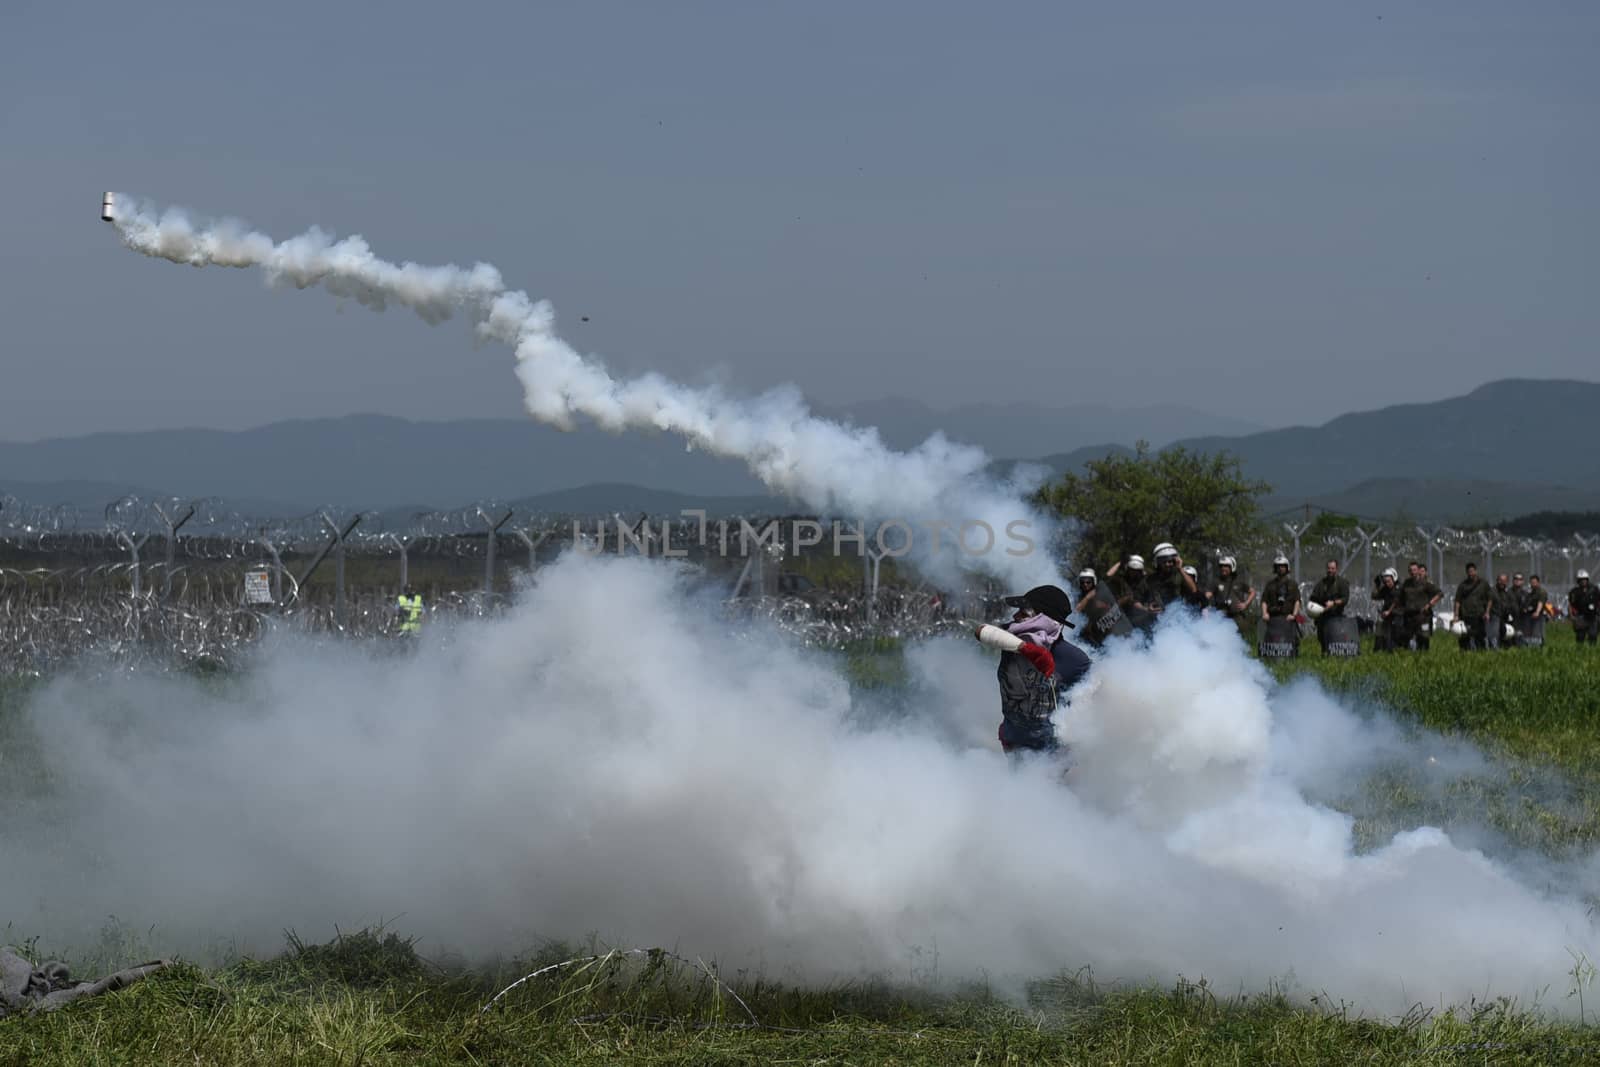 GREECE, Idomeni: A man throws back to Macedonian police a tear gas shell as migrants and refugees tried to break down the border fence near their makeshift camp at the Greek-Macedonian border near Idomeni village, on April 13, 2016. About 100 migrants spread out over about 100 metres (yards) tugging at the wire fence, but swiftly pulled back when two squads of Greek riot police moved in, the reporter said. The Greek riot police positioned themselves between the migrants and the Macedonian fence, ending the incident.